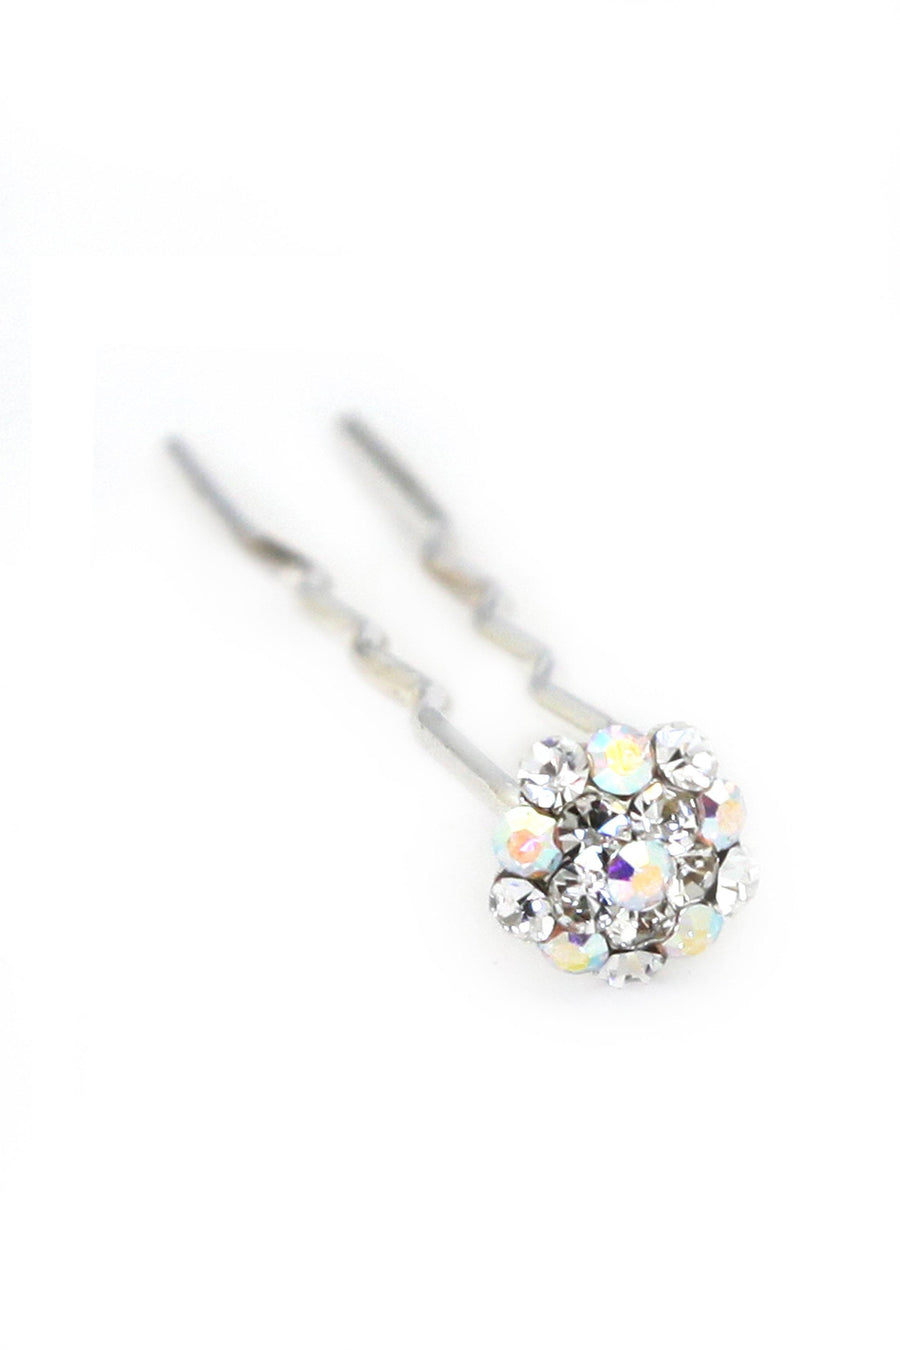 Soho Style Stick Multi- Clear Mini Crystal Cluster Hair Stick